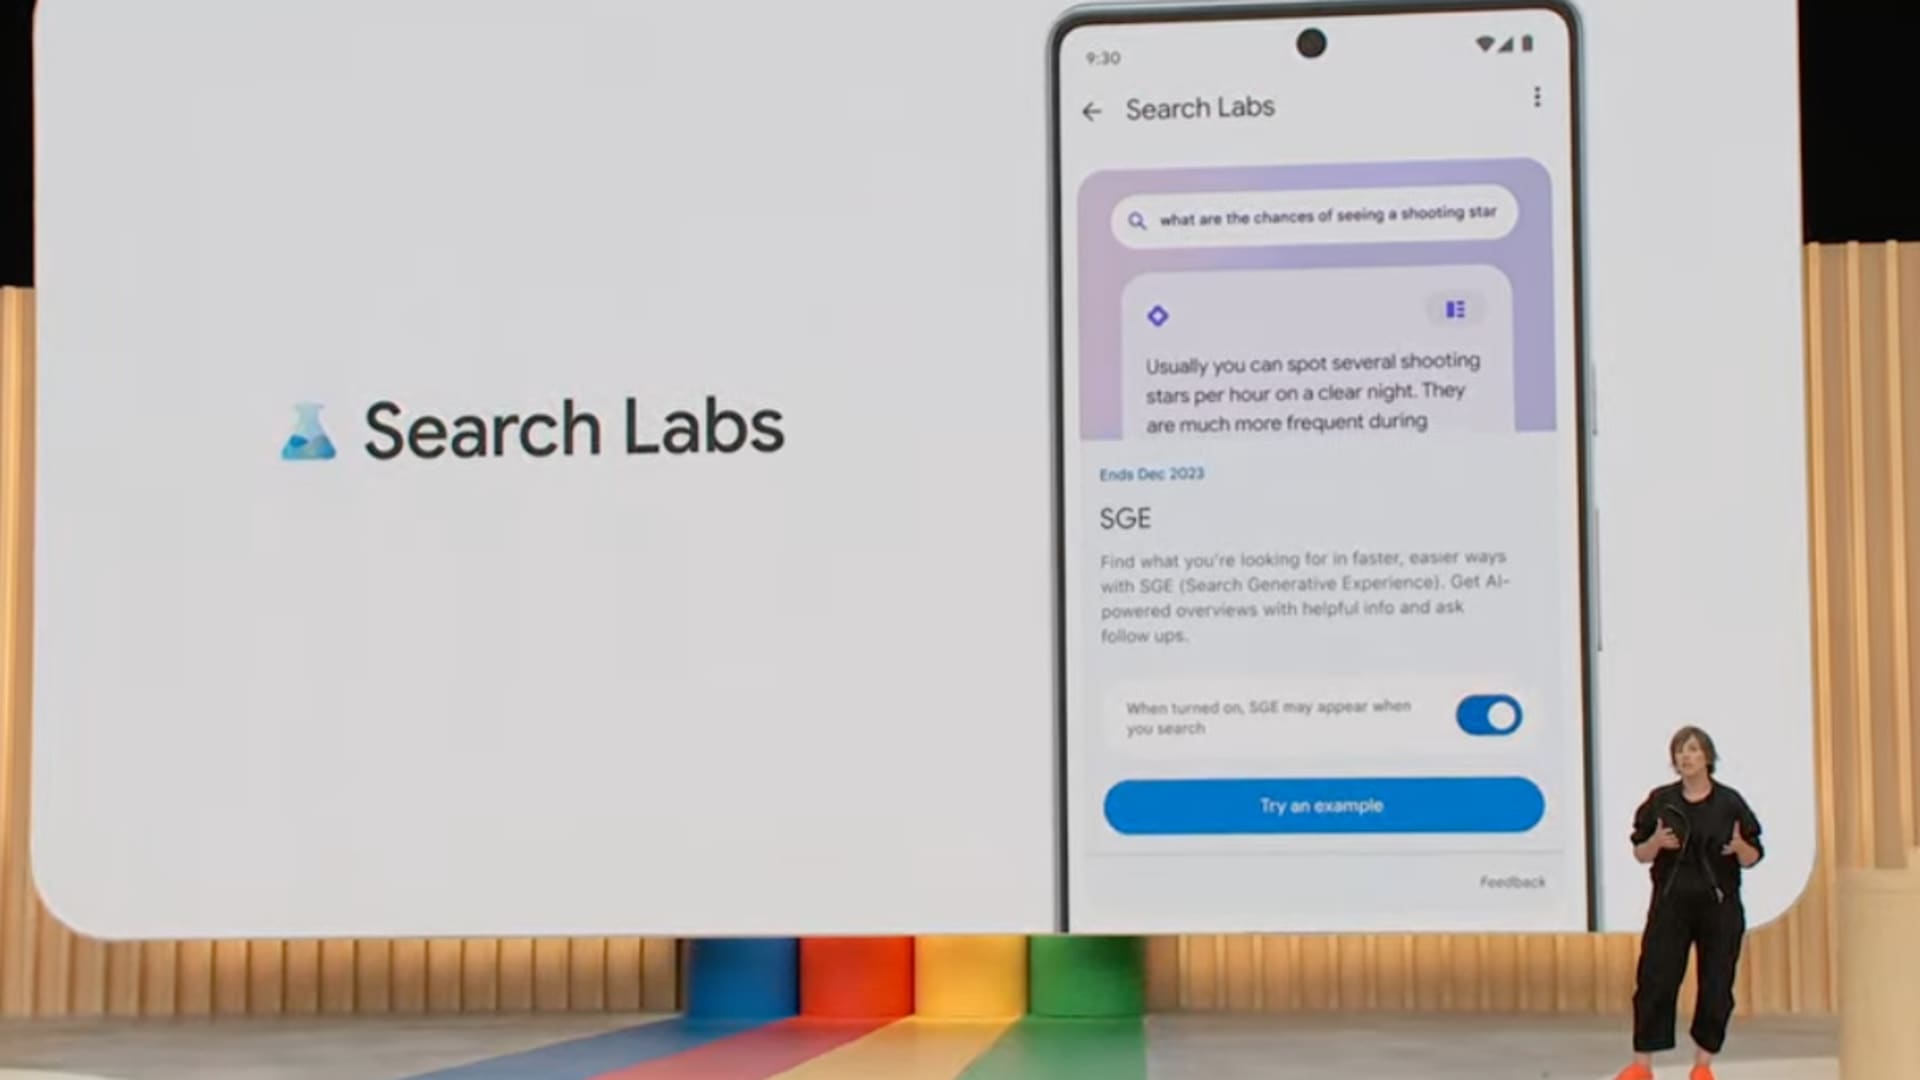 presenting Search Labs at the Google I/O Developer's Conference in Mountain View, Calif. on May 10, 2023.